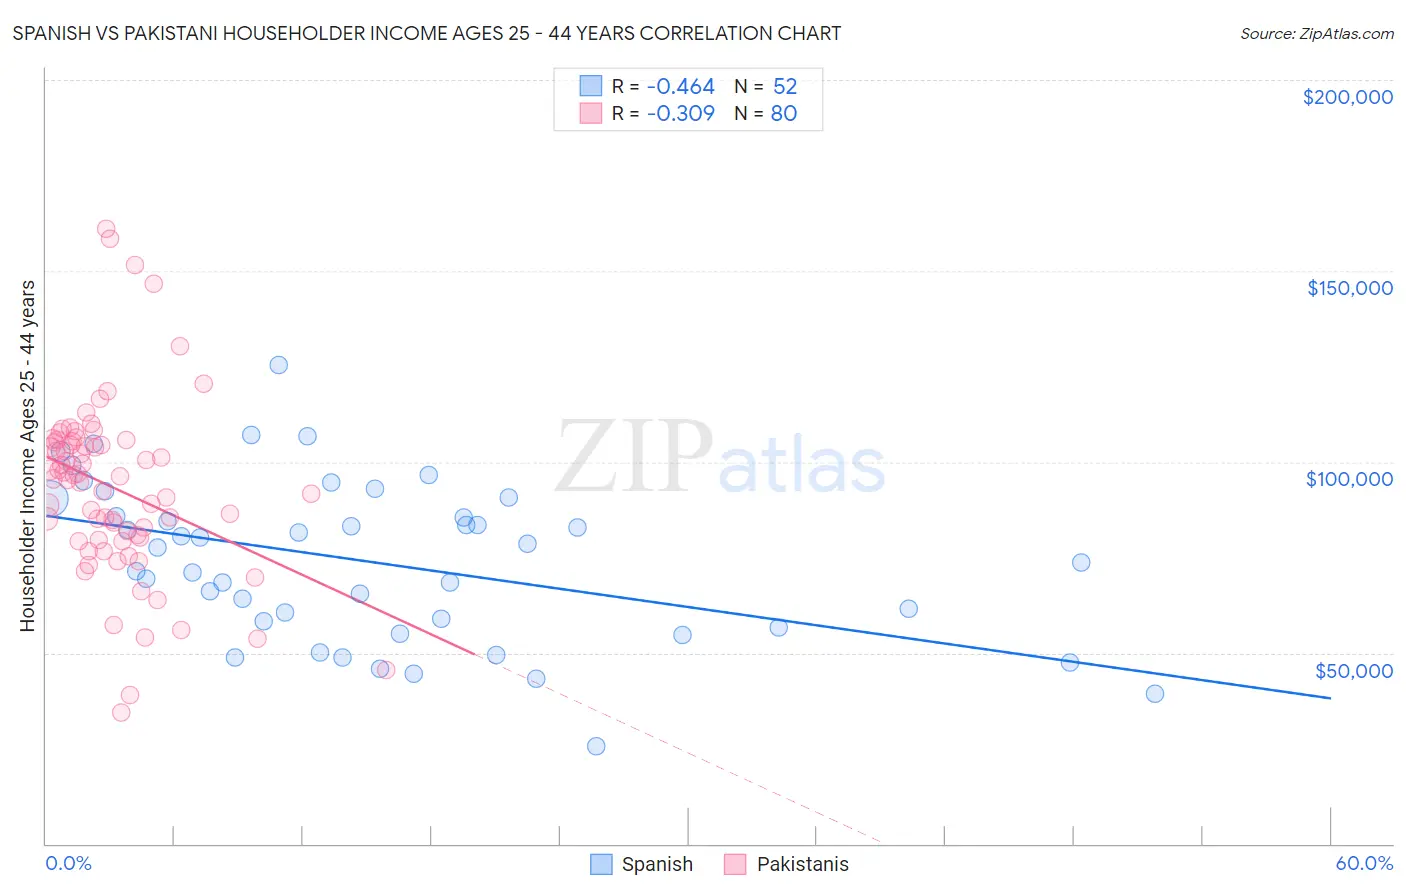 Spanish vs Pakistani Householder Income Ages 25 - 44 years